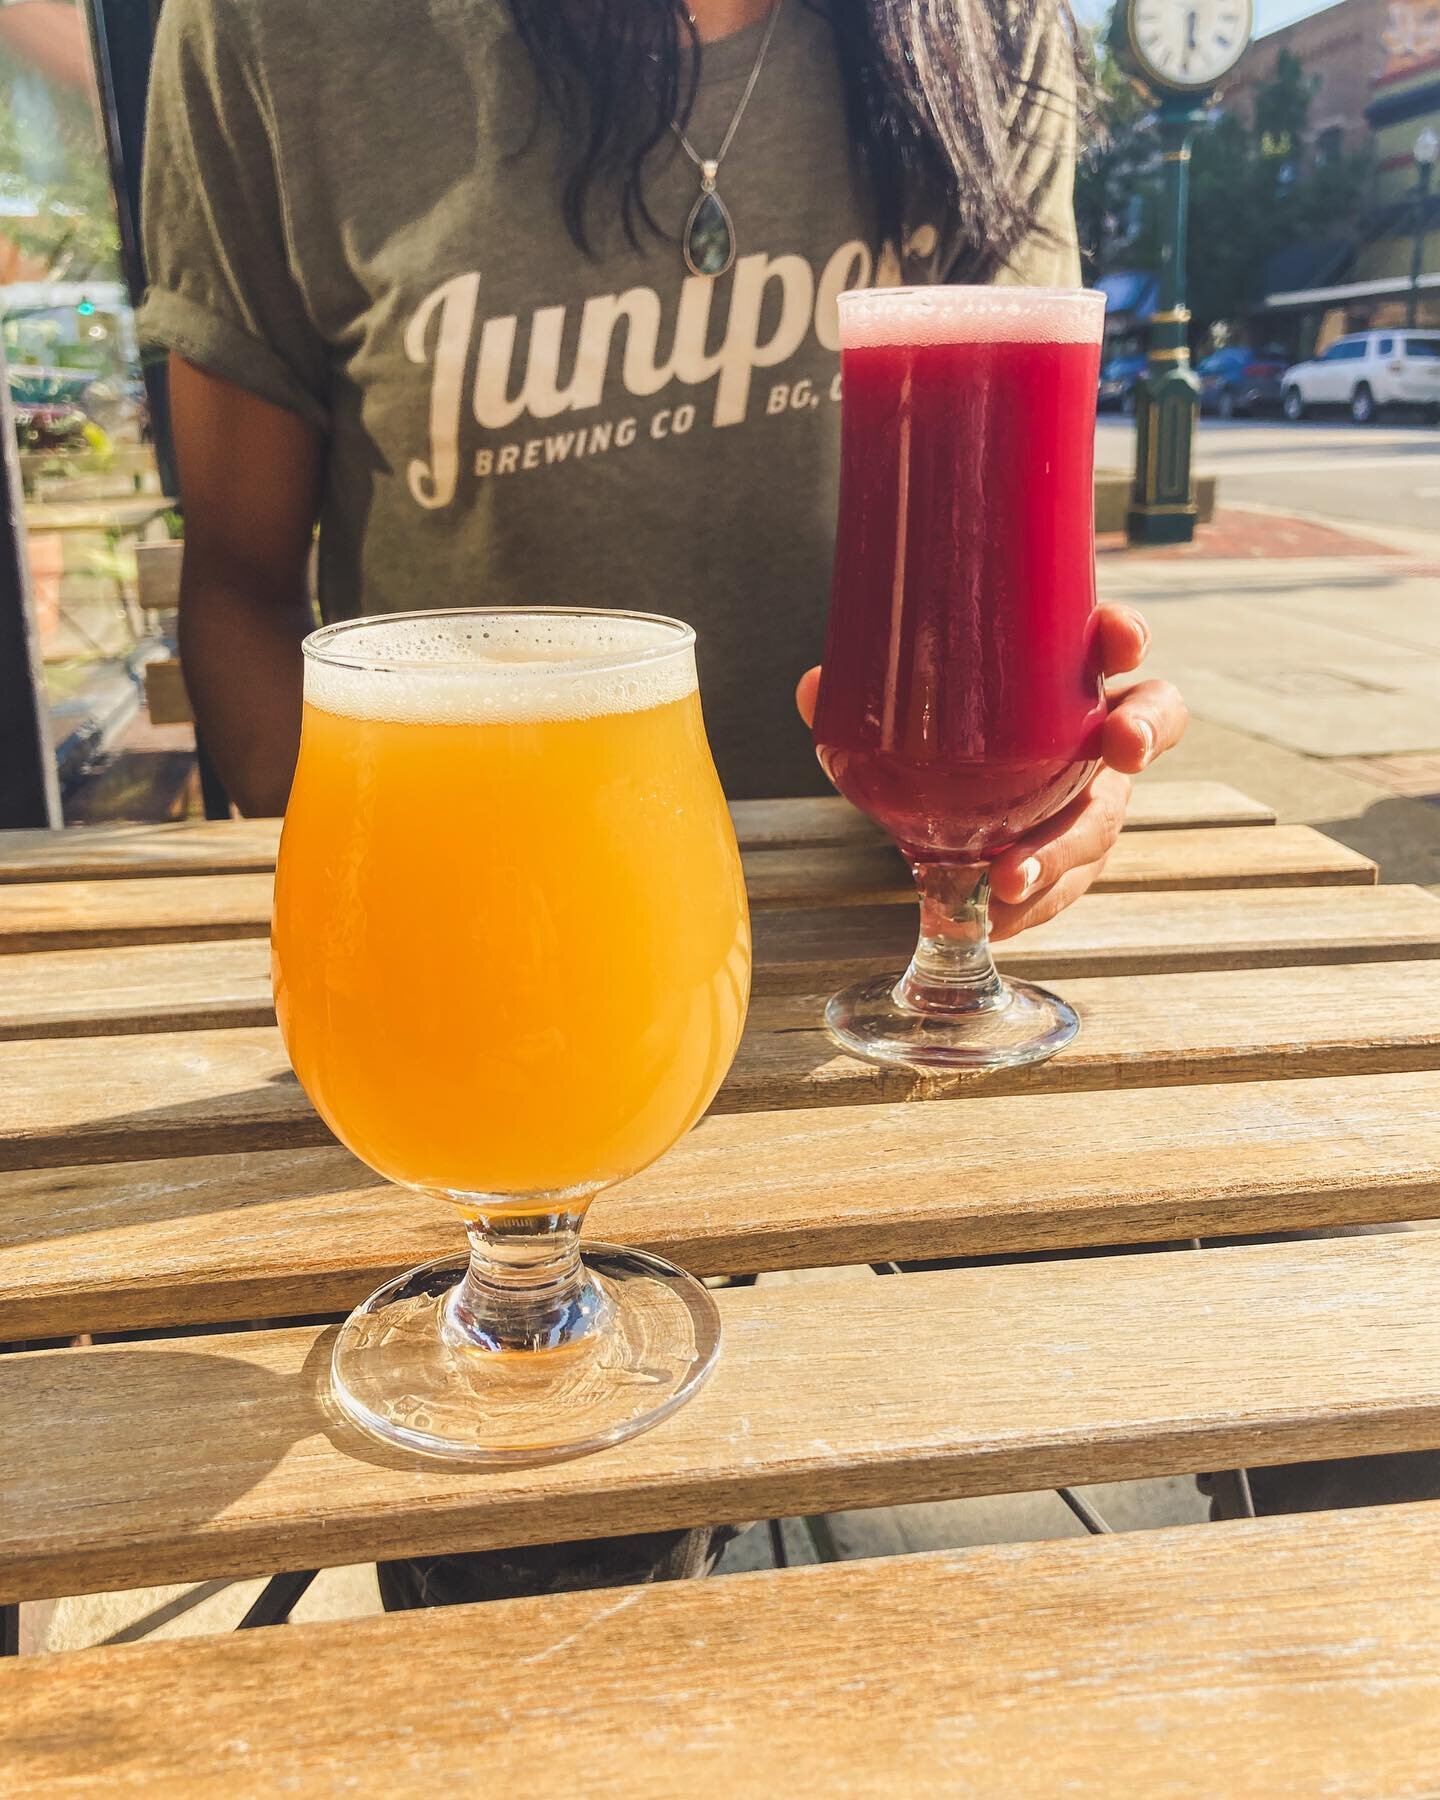 Introducing our two newest beers: Boogie Shoes + Knee Deep (v2)

Boogie Shoes | Triple Hazy IPA
&bull; 10% ABV
&bull; 25 IBU

Knee Deep | Blueberry Raspberry Sour
&bull; 5.5% ABV
&bull; 4 IBU

Perfectly refreshing and flavorful to beat the last bit o